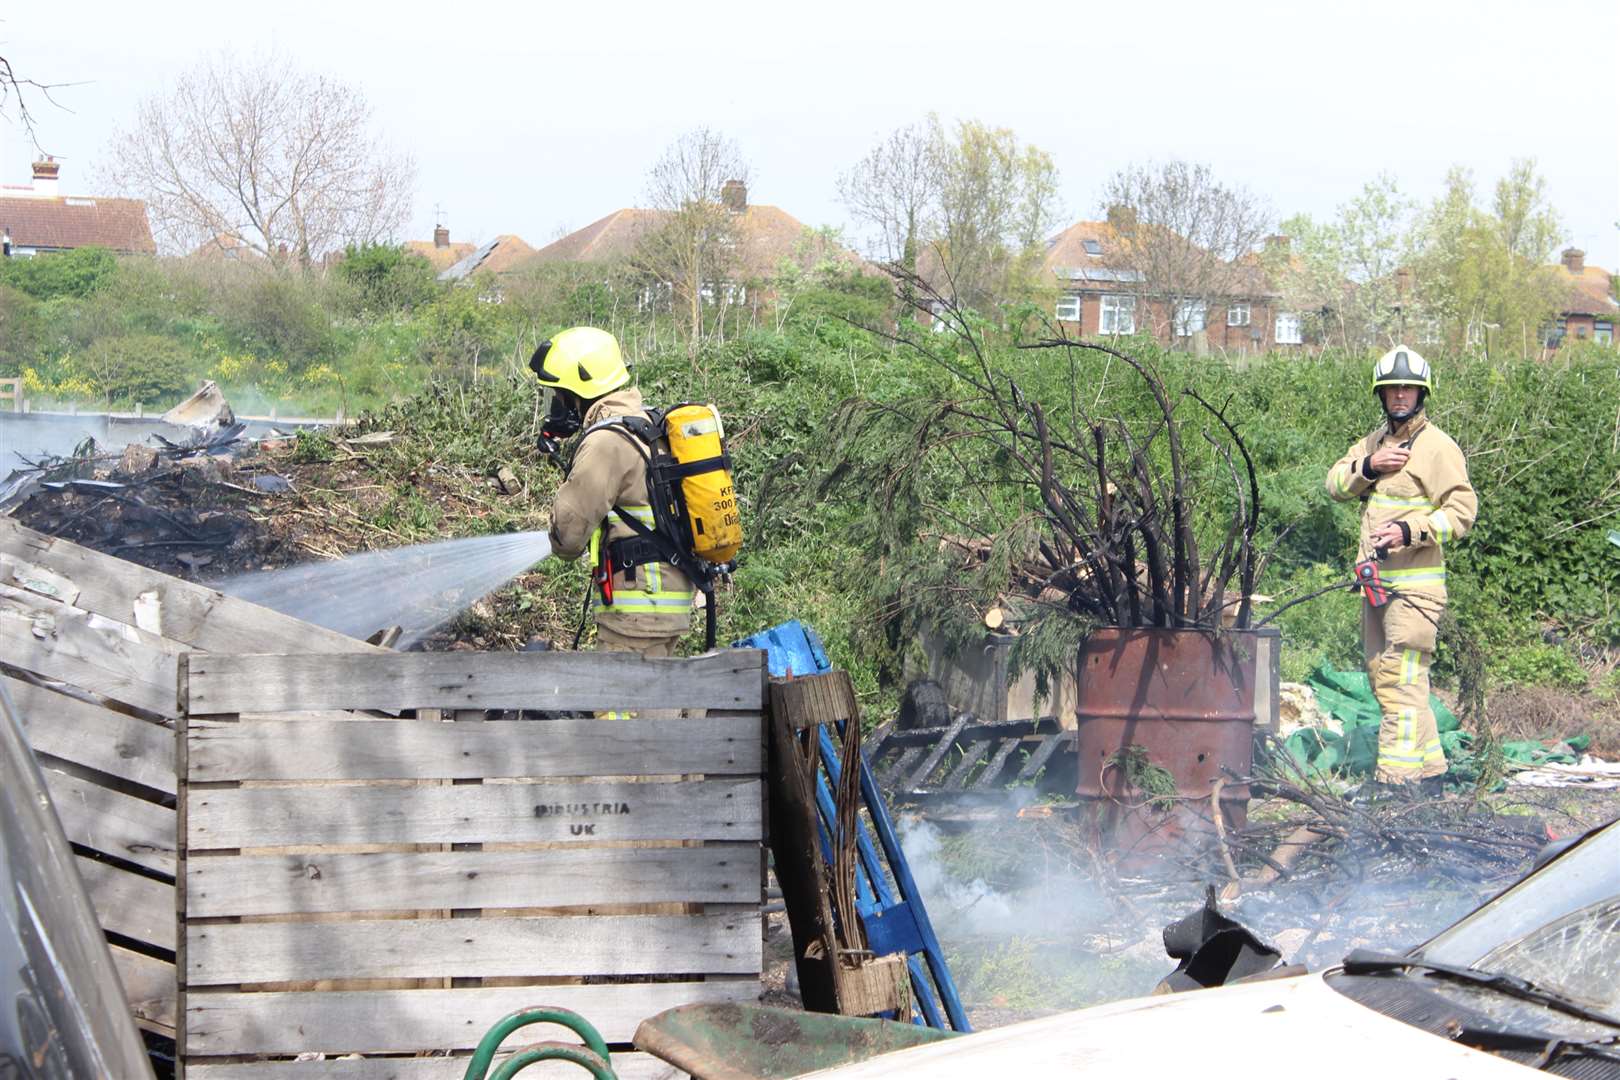 Fire-fighters using breathing gear tackle the blaze at Monkey Farm car-breakers, Sheerness